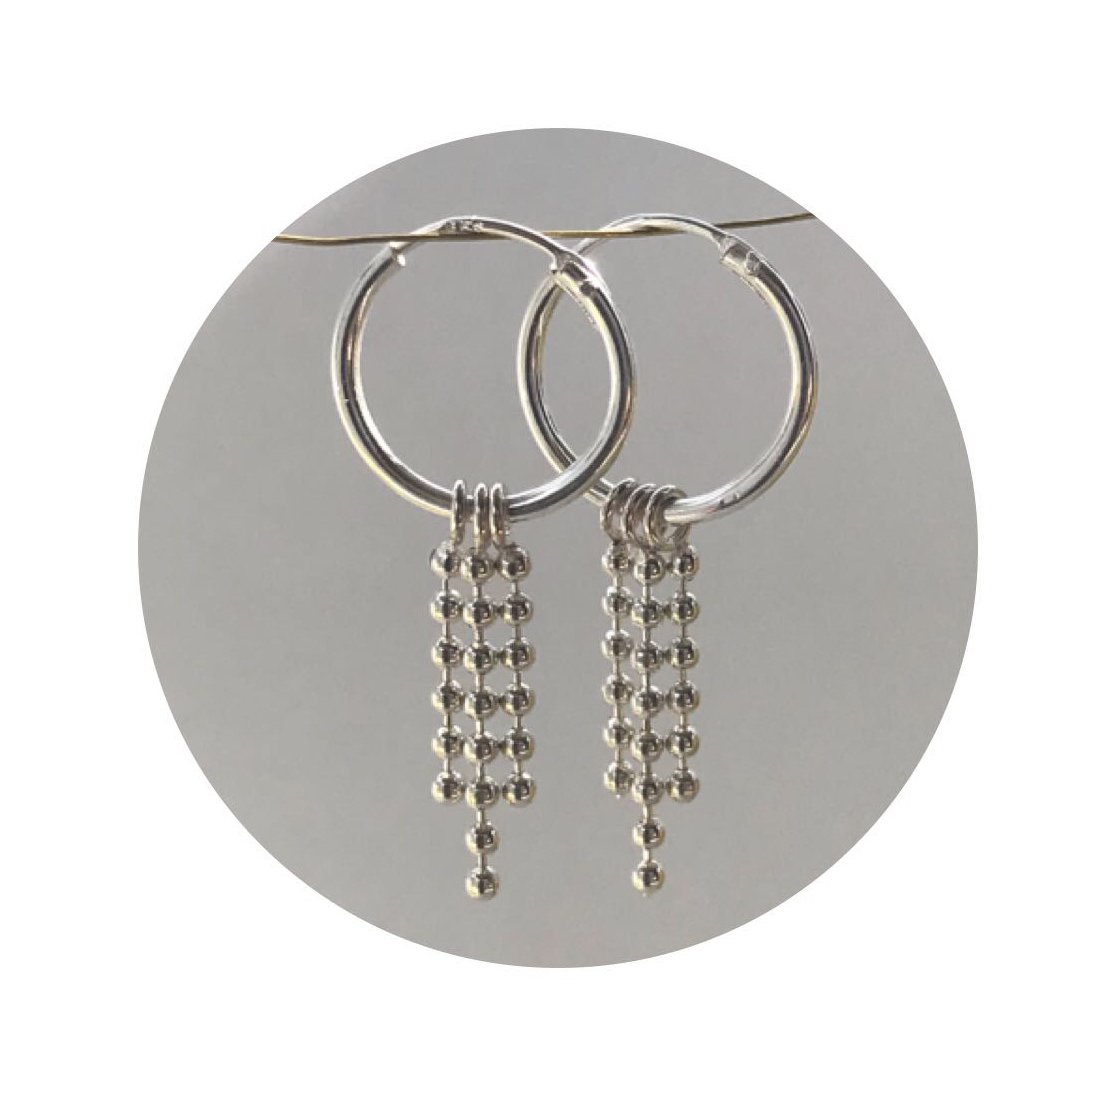 Image of Silver hoops with chain fringe